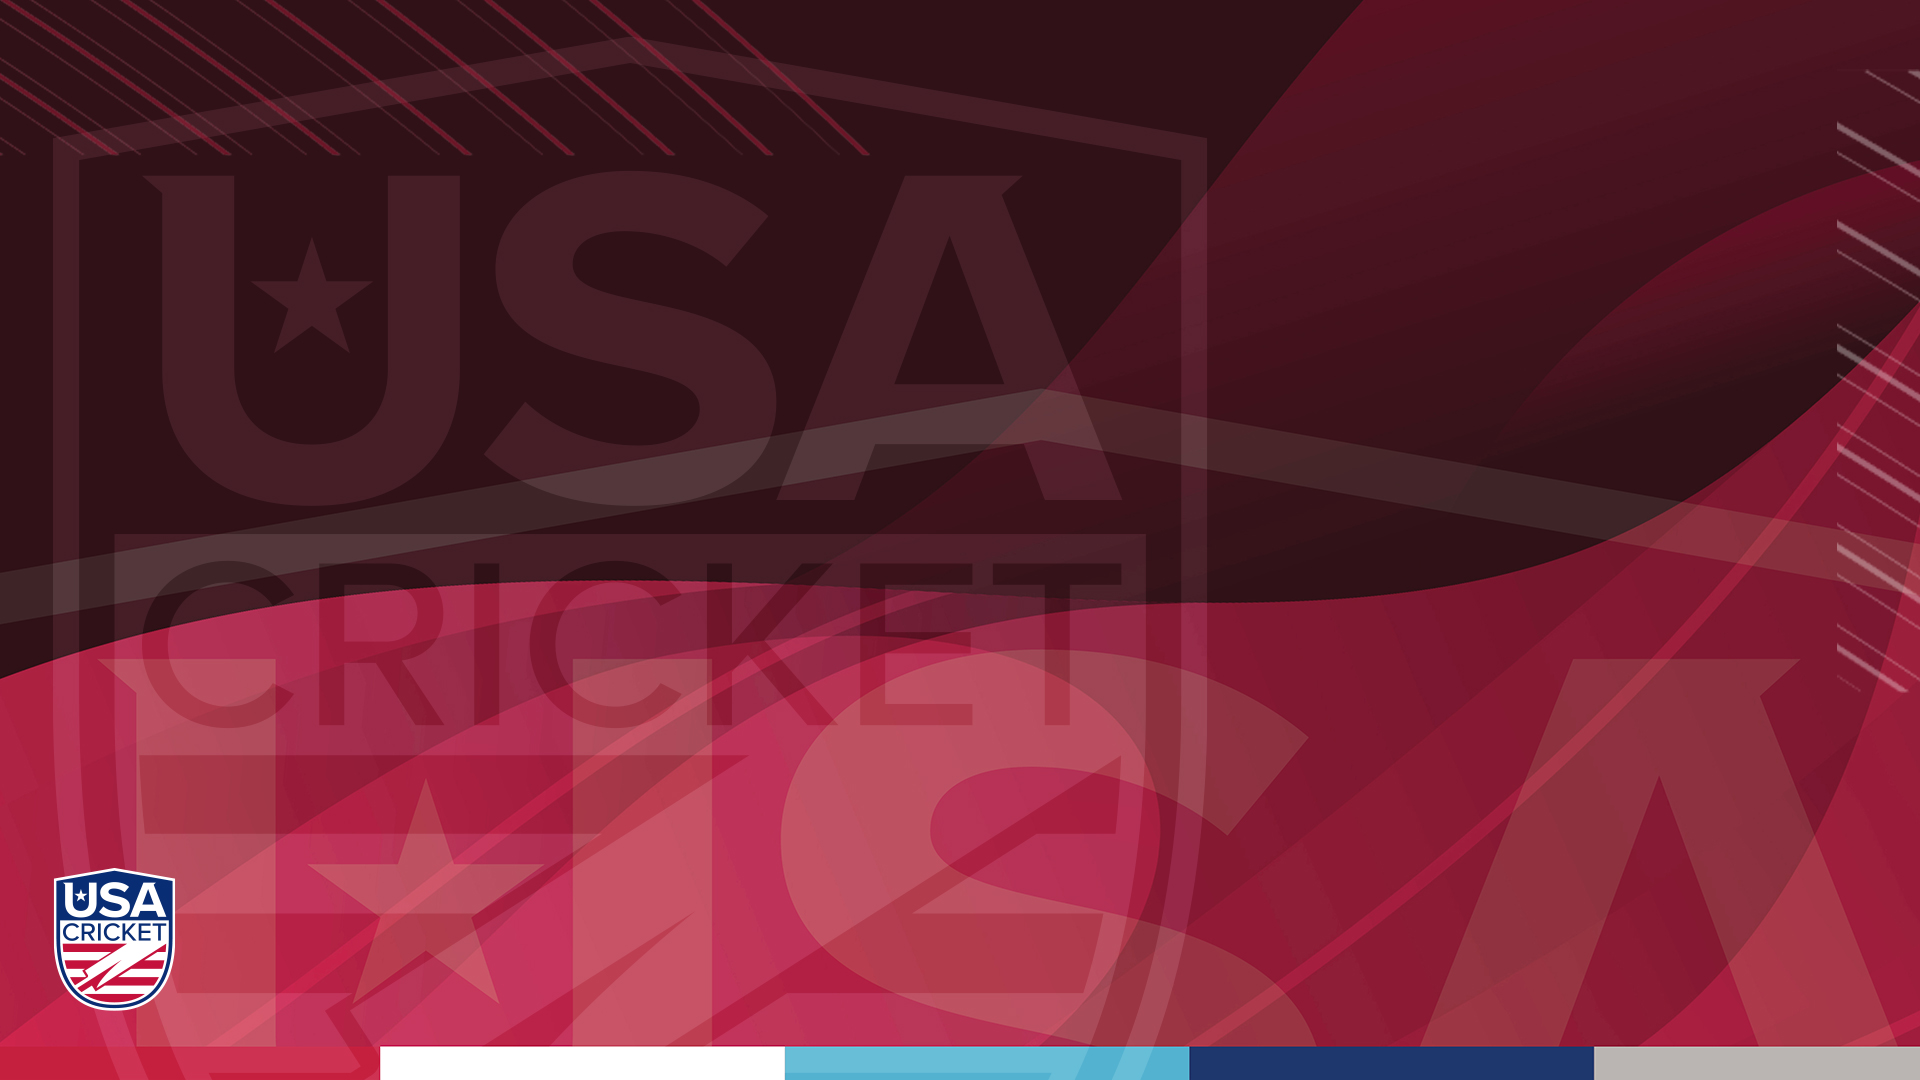 USA Cricket Invites You to Review and Provide Feedback on the Constitution